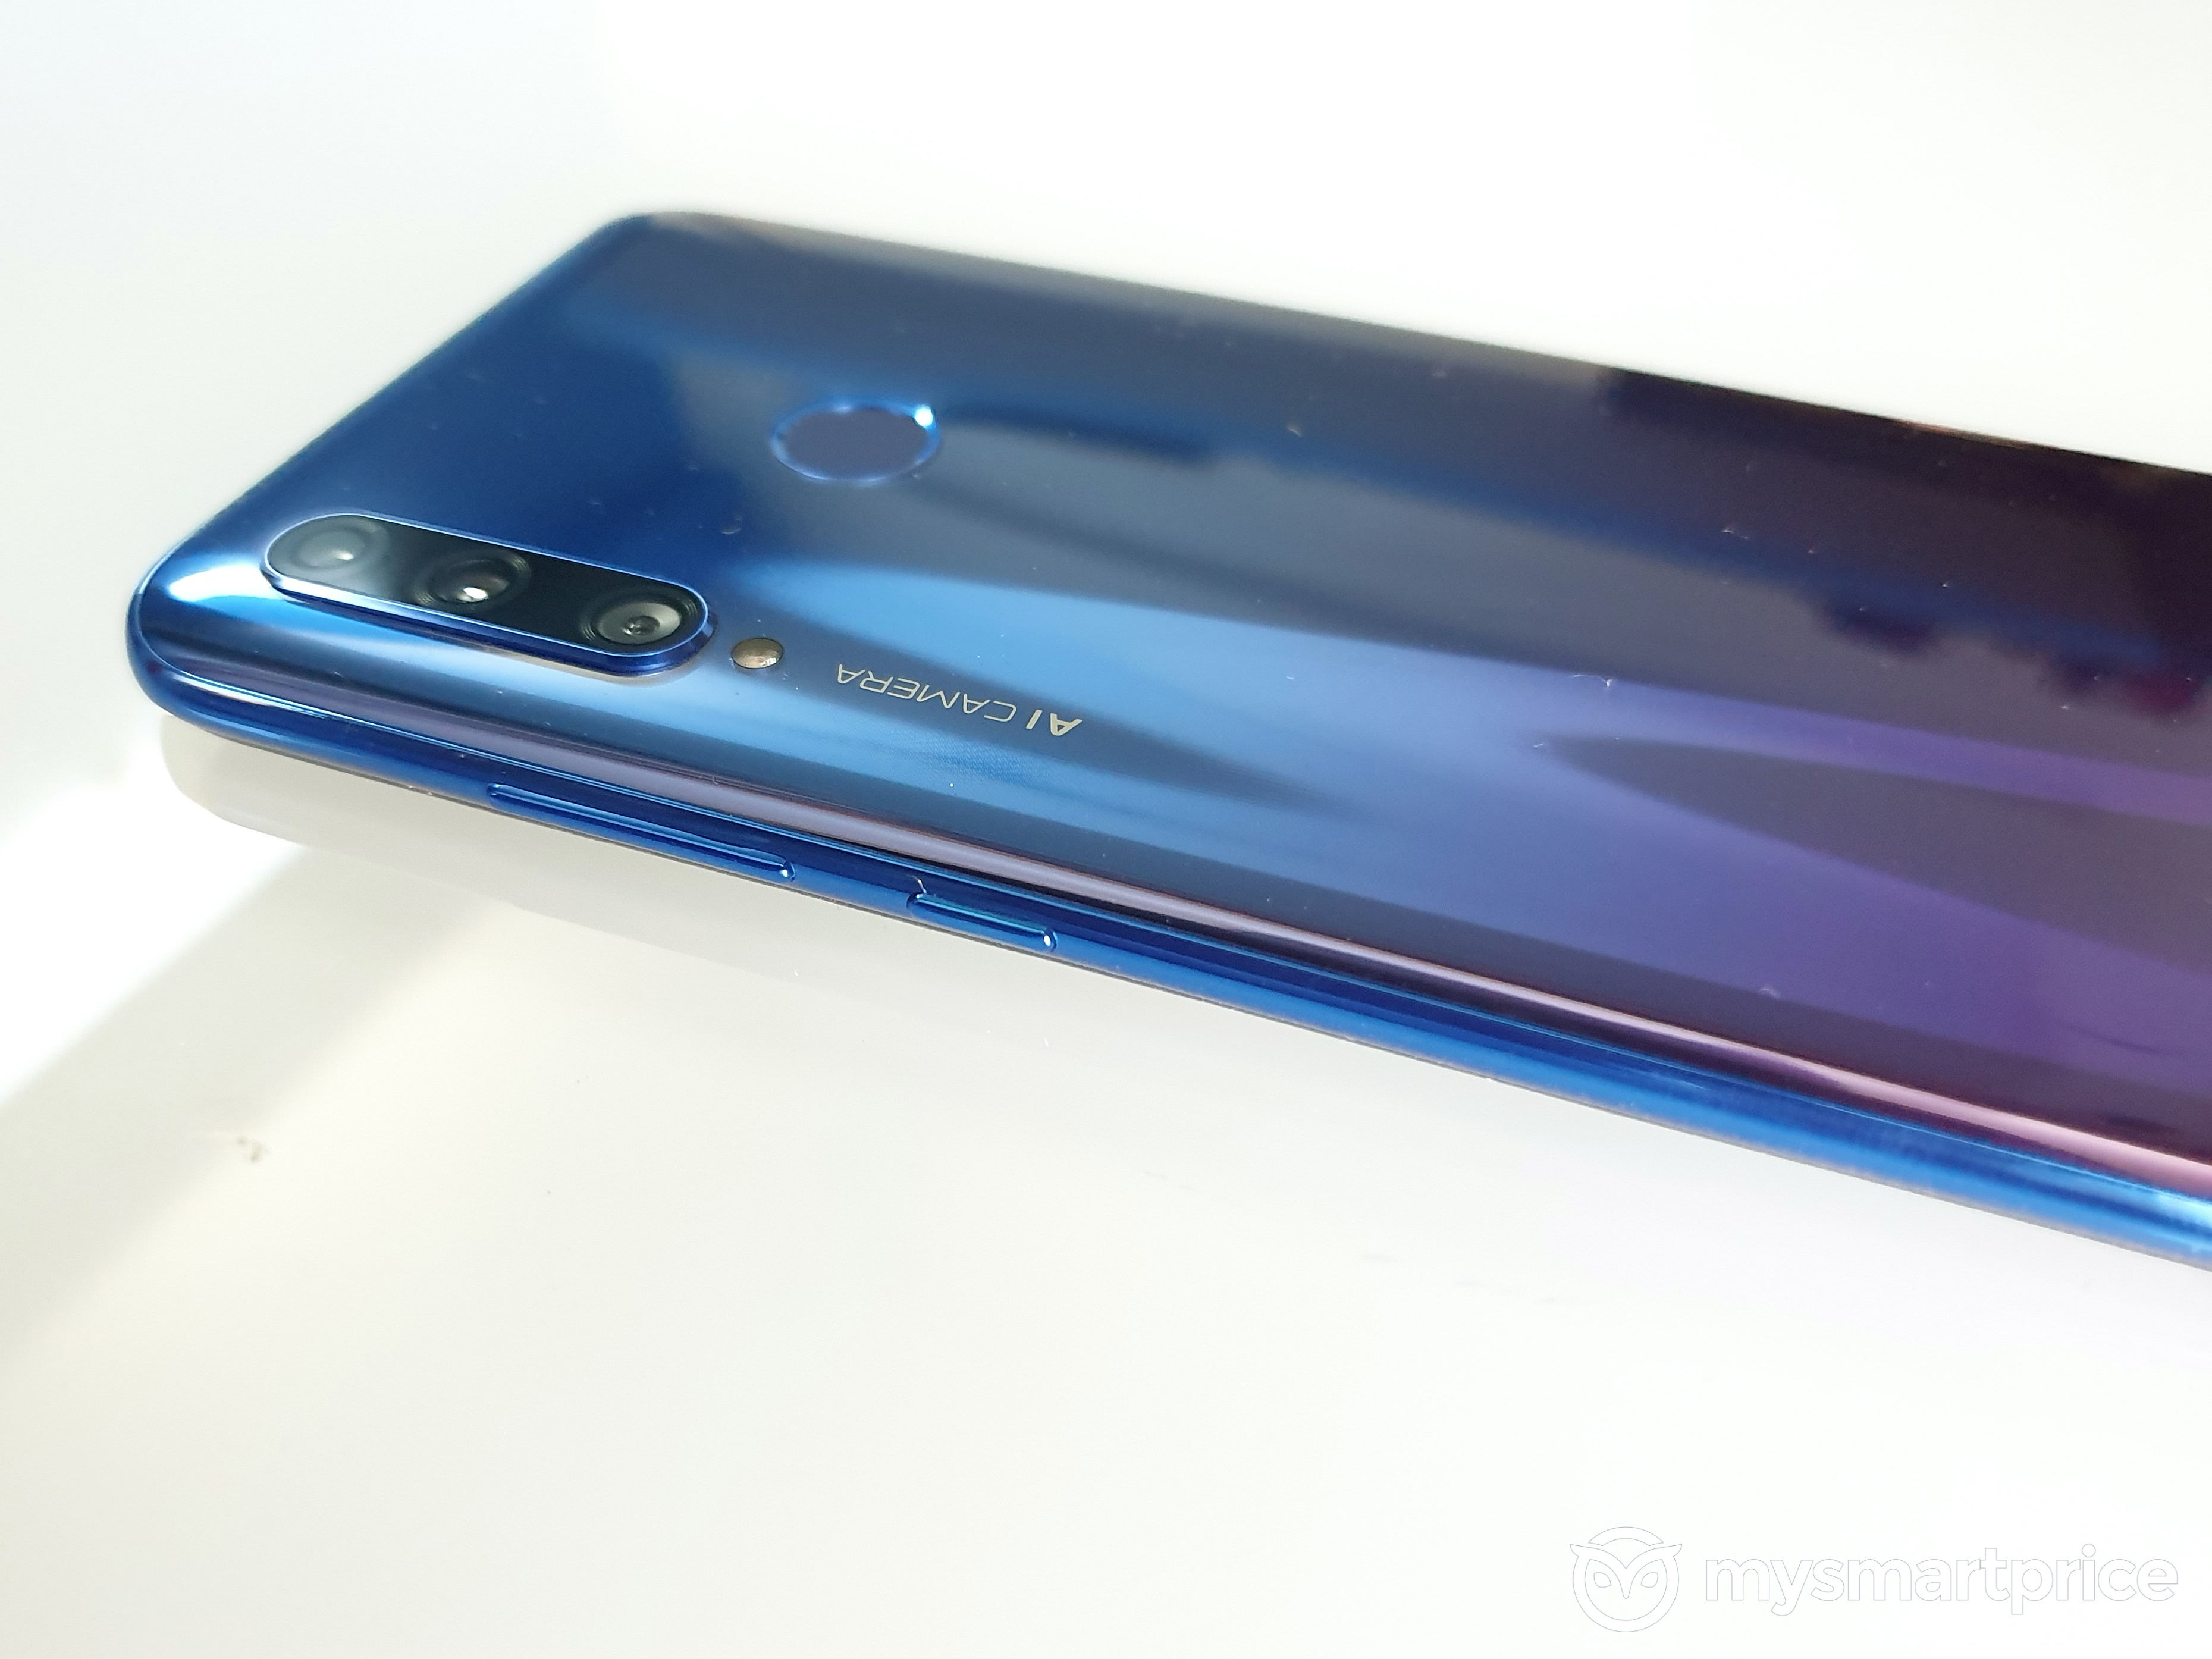 Honor 20i Review